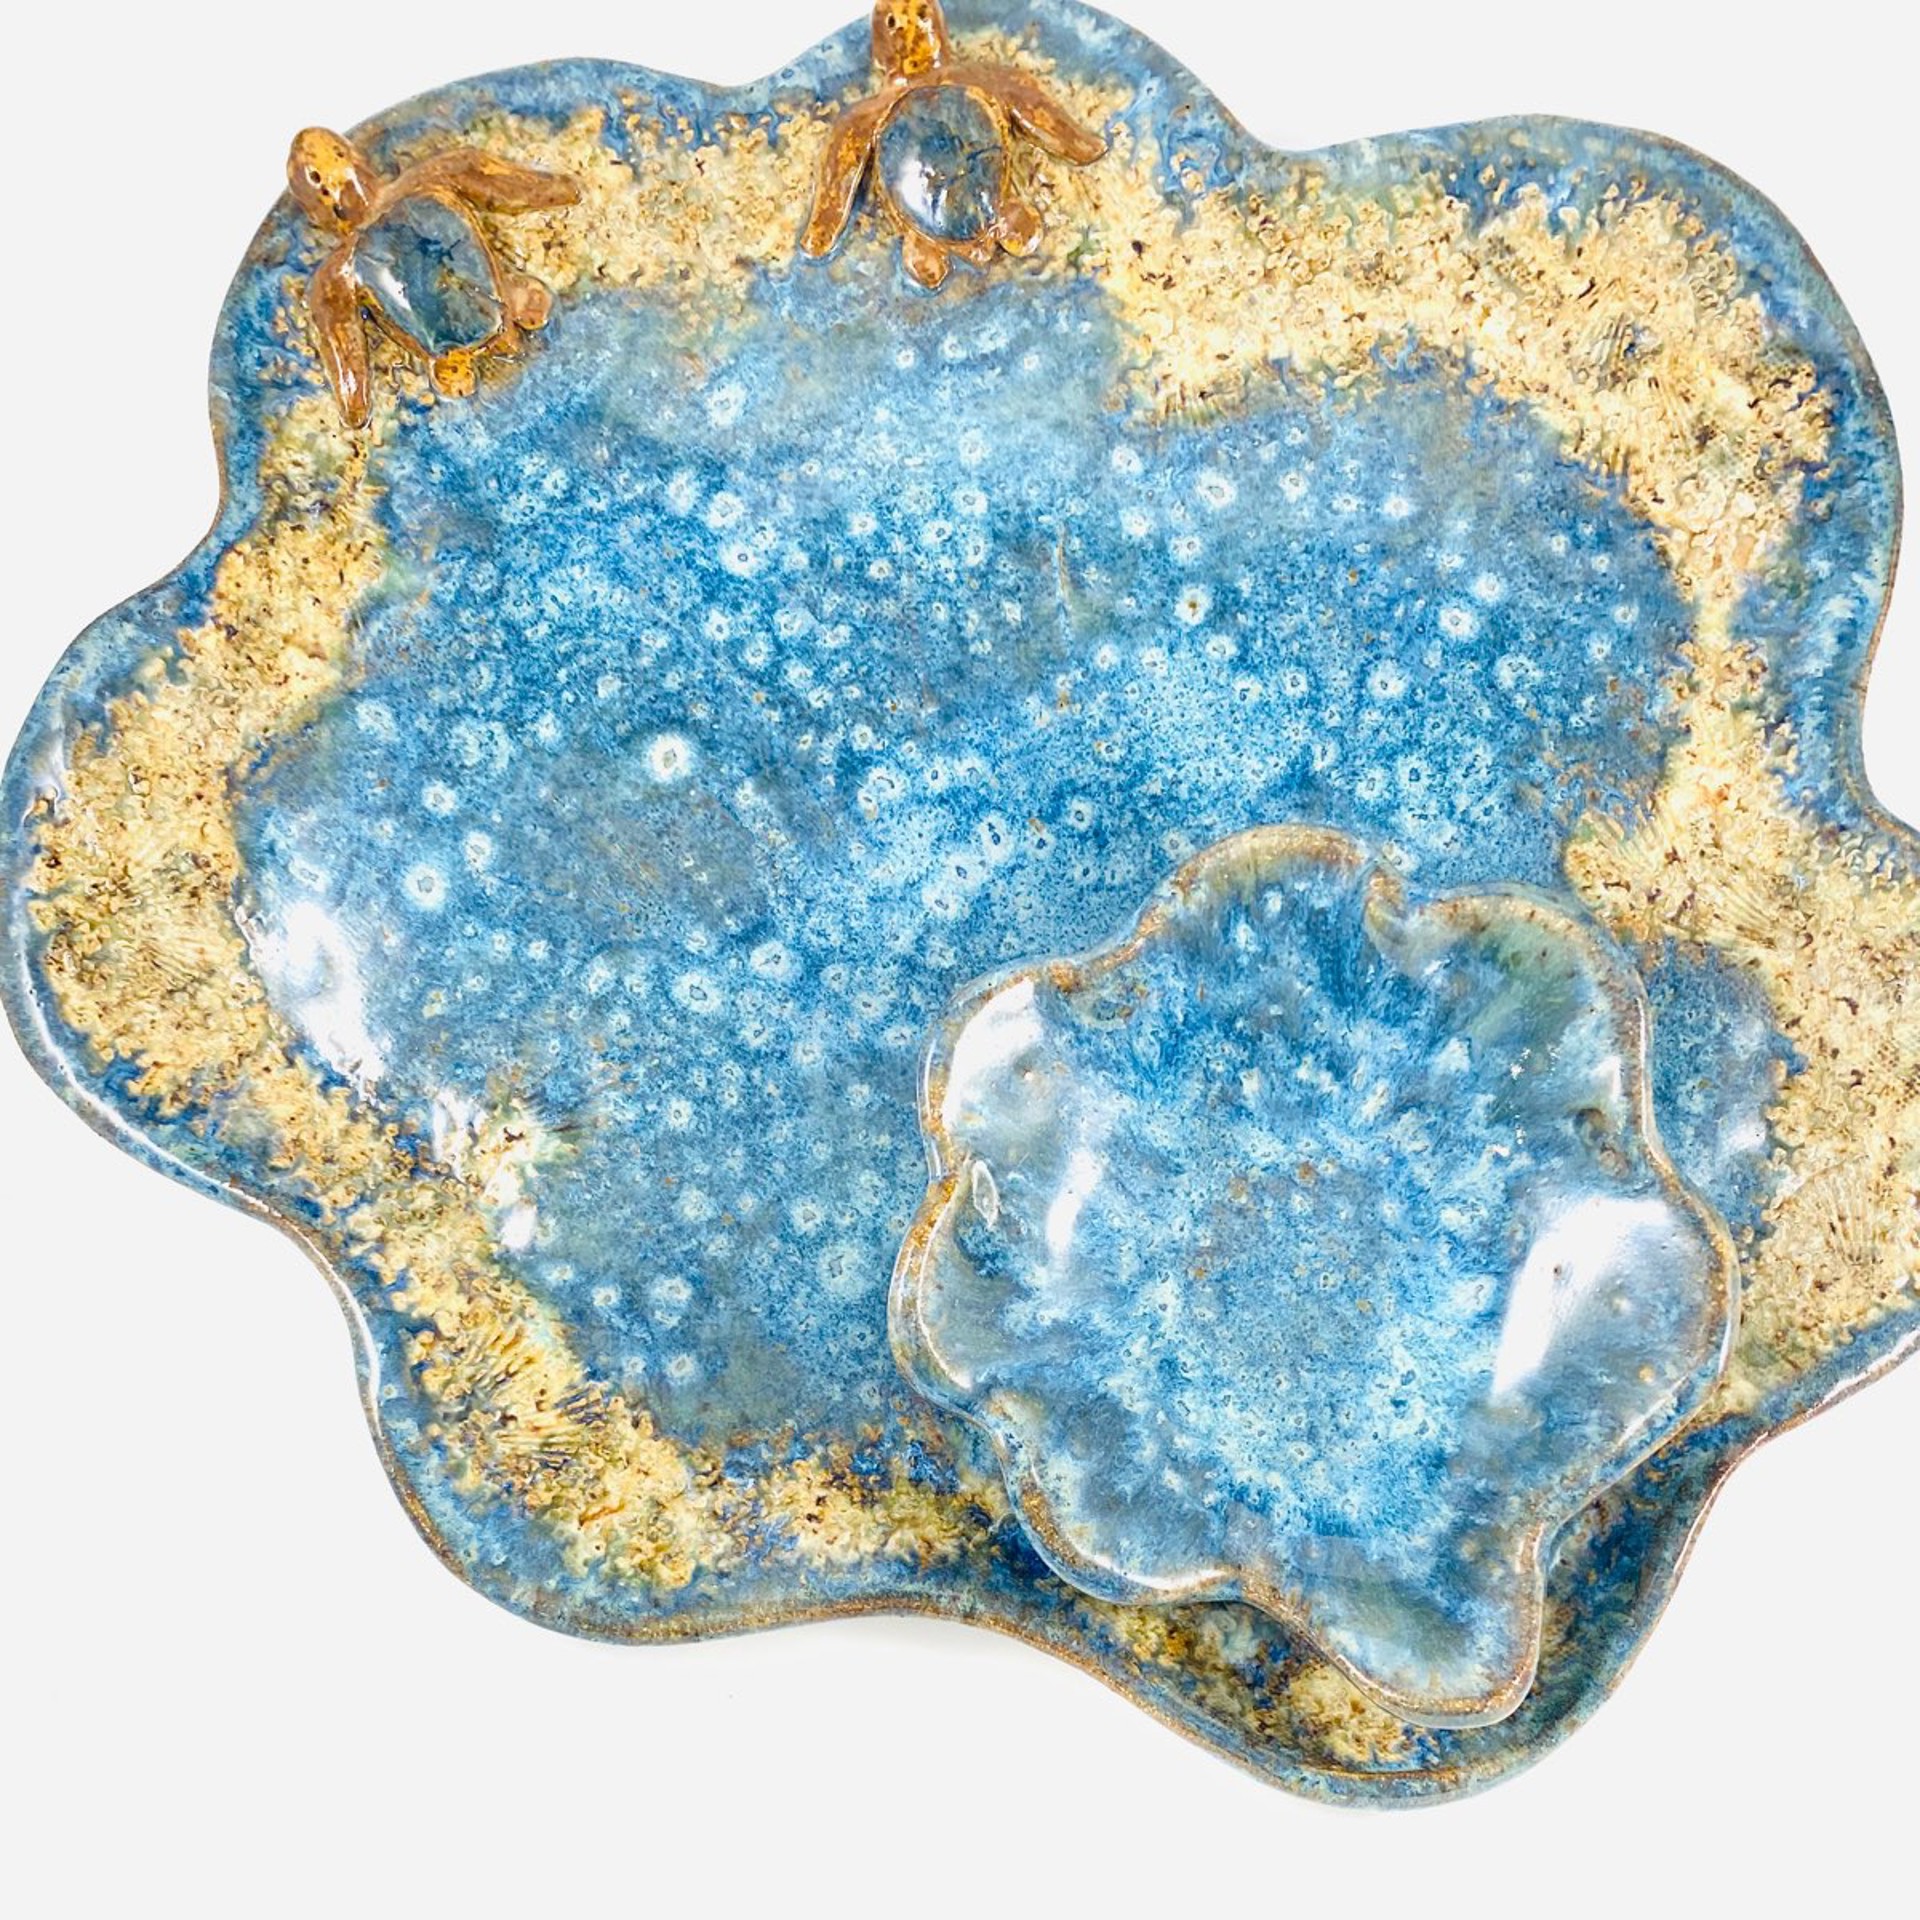 LG21-600 Chip and Dip with Turtles (Blue Glaze) by Jim & Steffi Logan